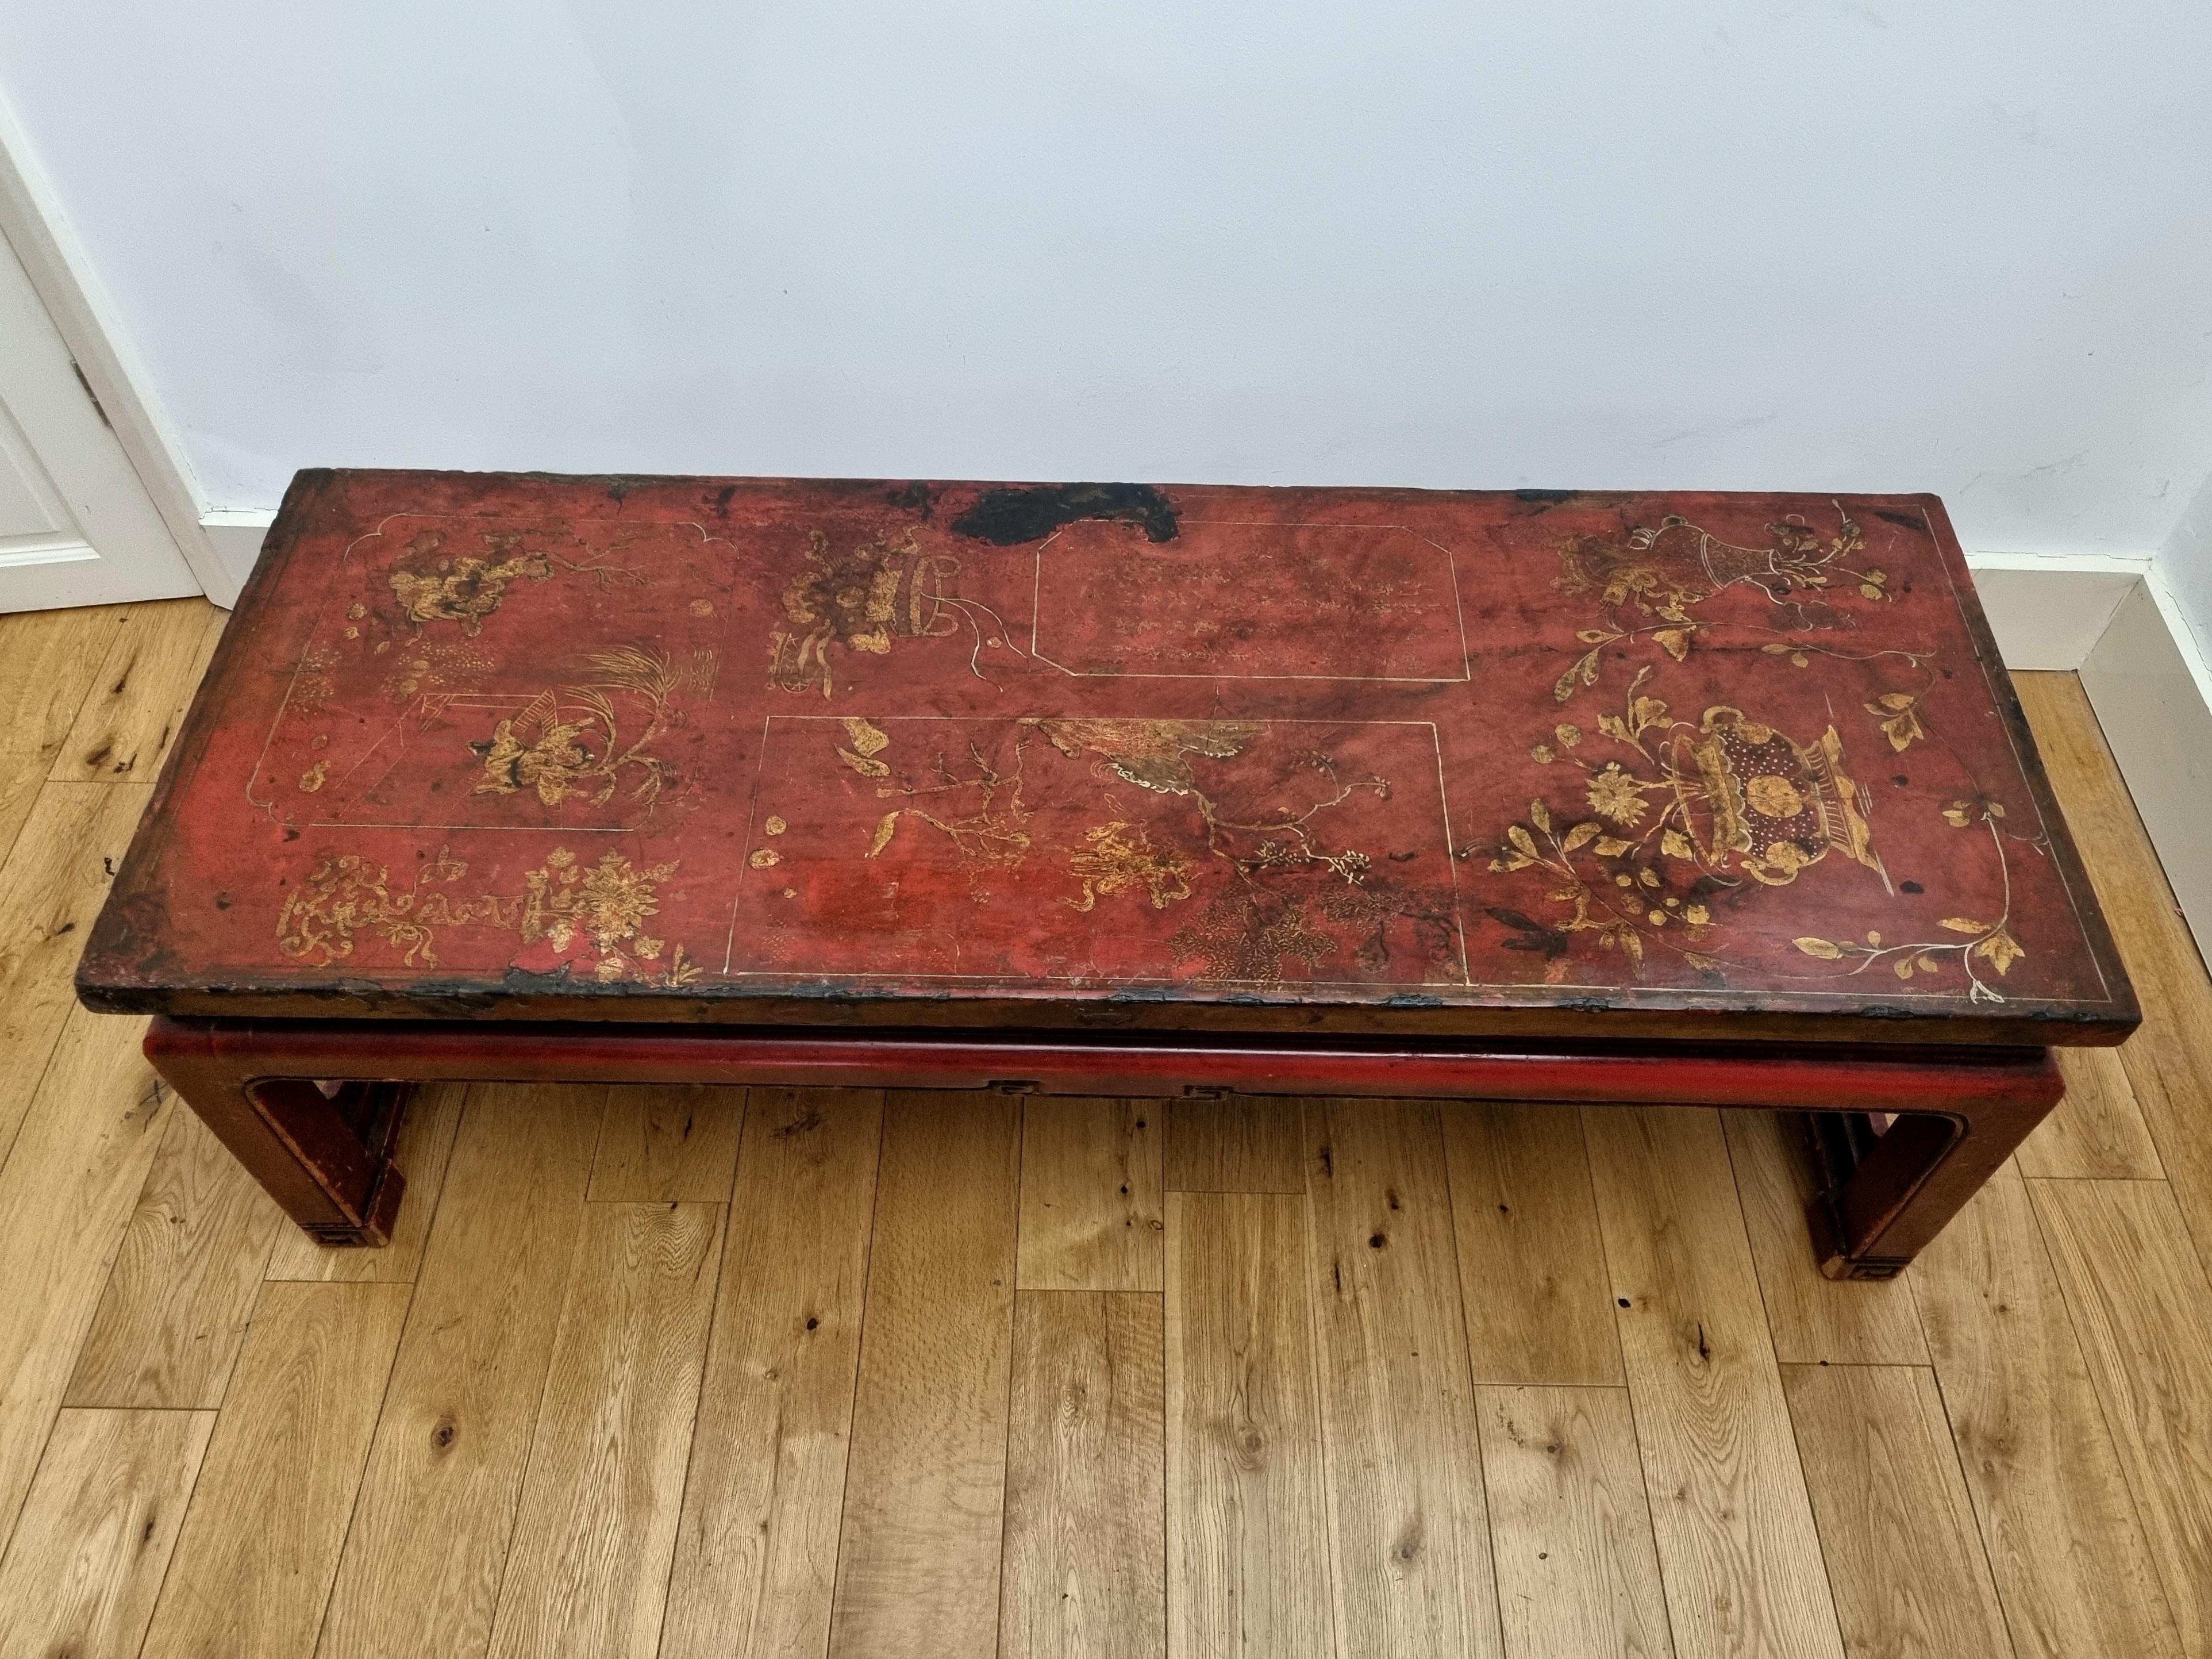 Elm 19th Century Red Lacquered Chinese Low Coffee Table from Shanxi Province